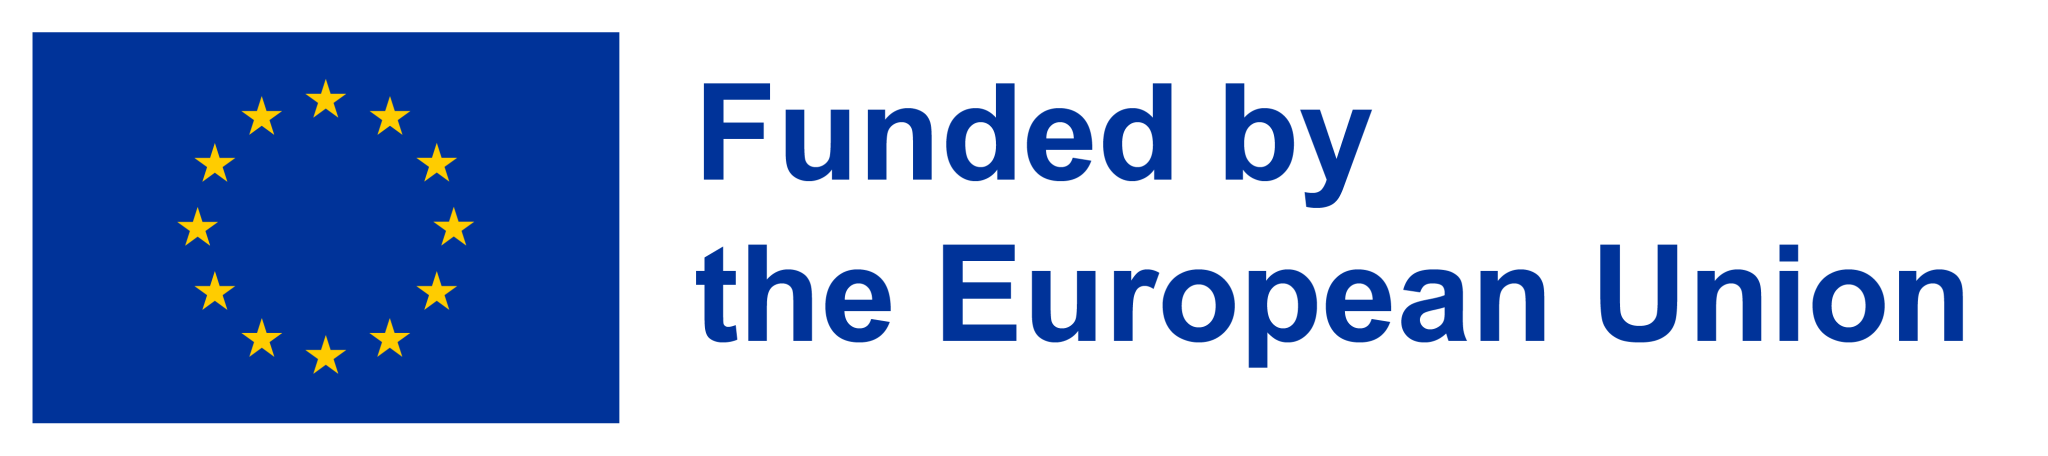 Funded by the European Union logo